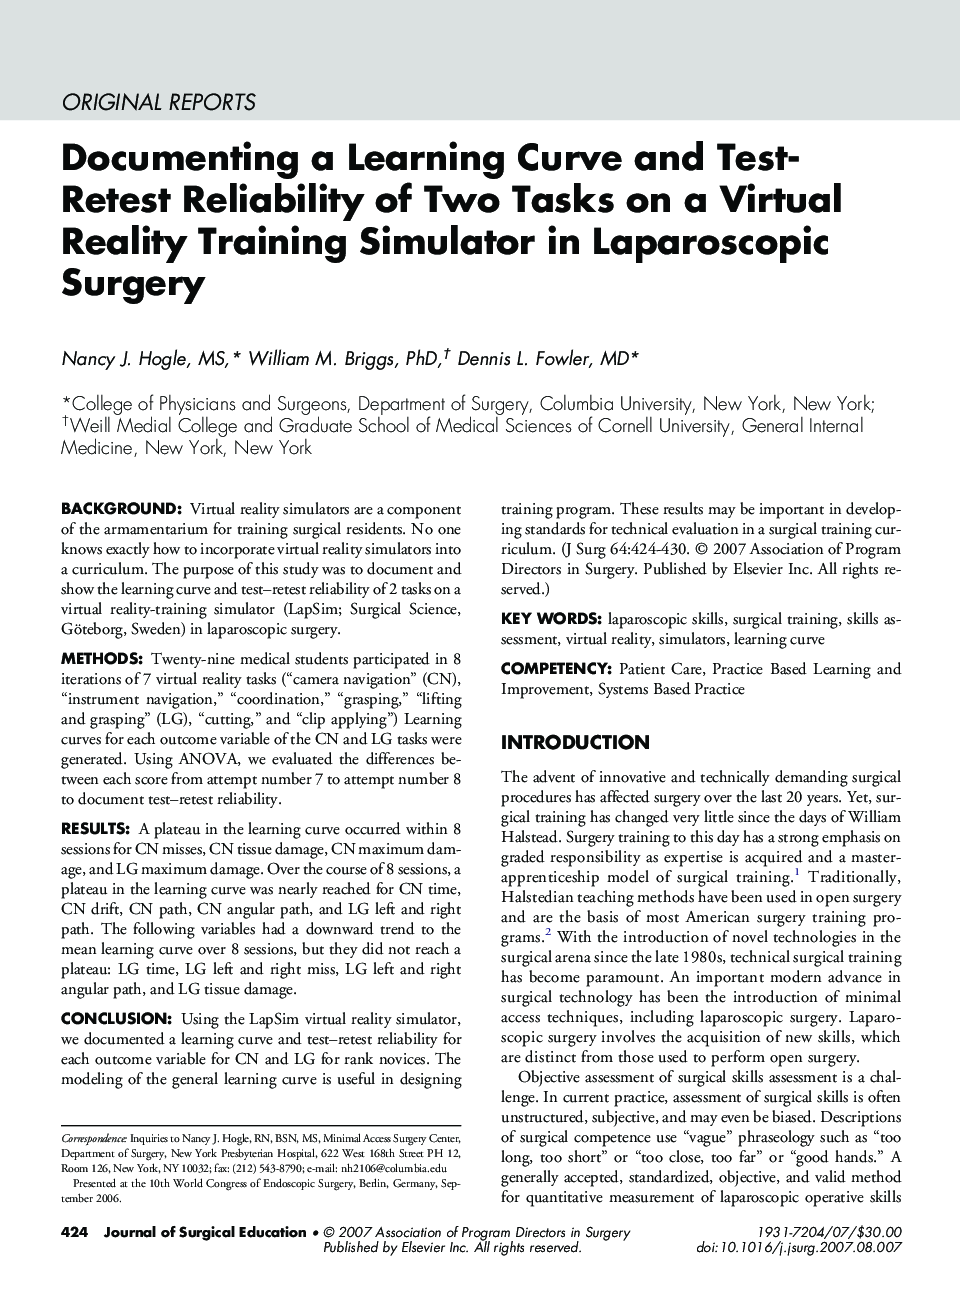 Documenting a Learning Curve and Test-Retest Reliability of Two Tasks on a Virtual Reality Training Simulator in Laparoscopic Surgery